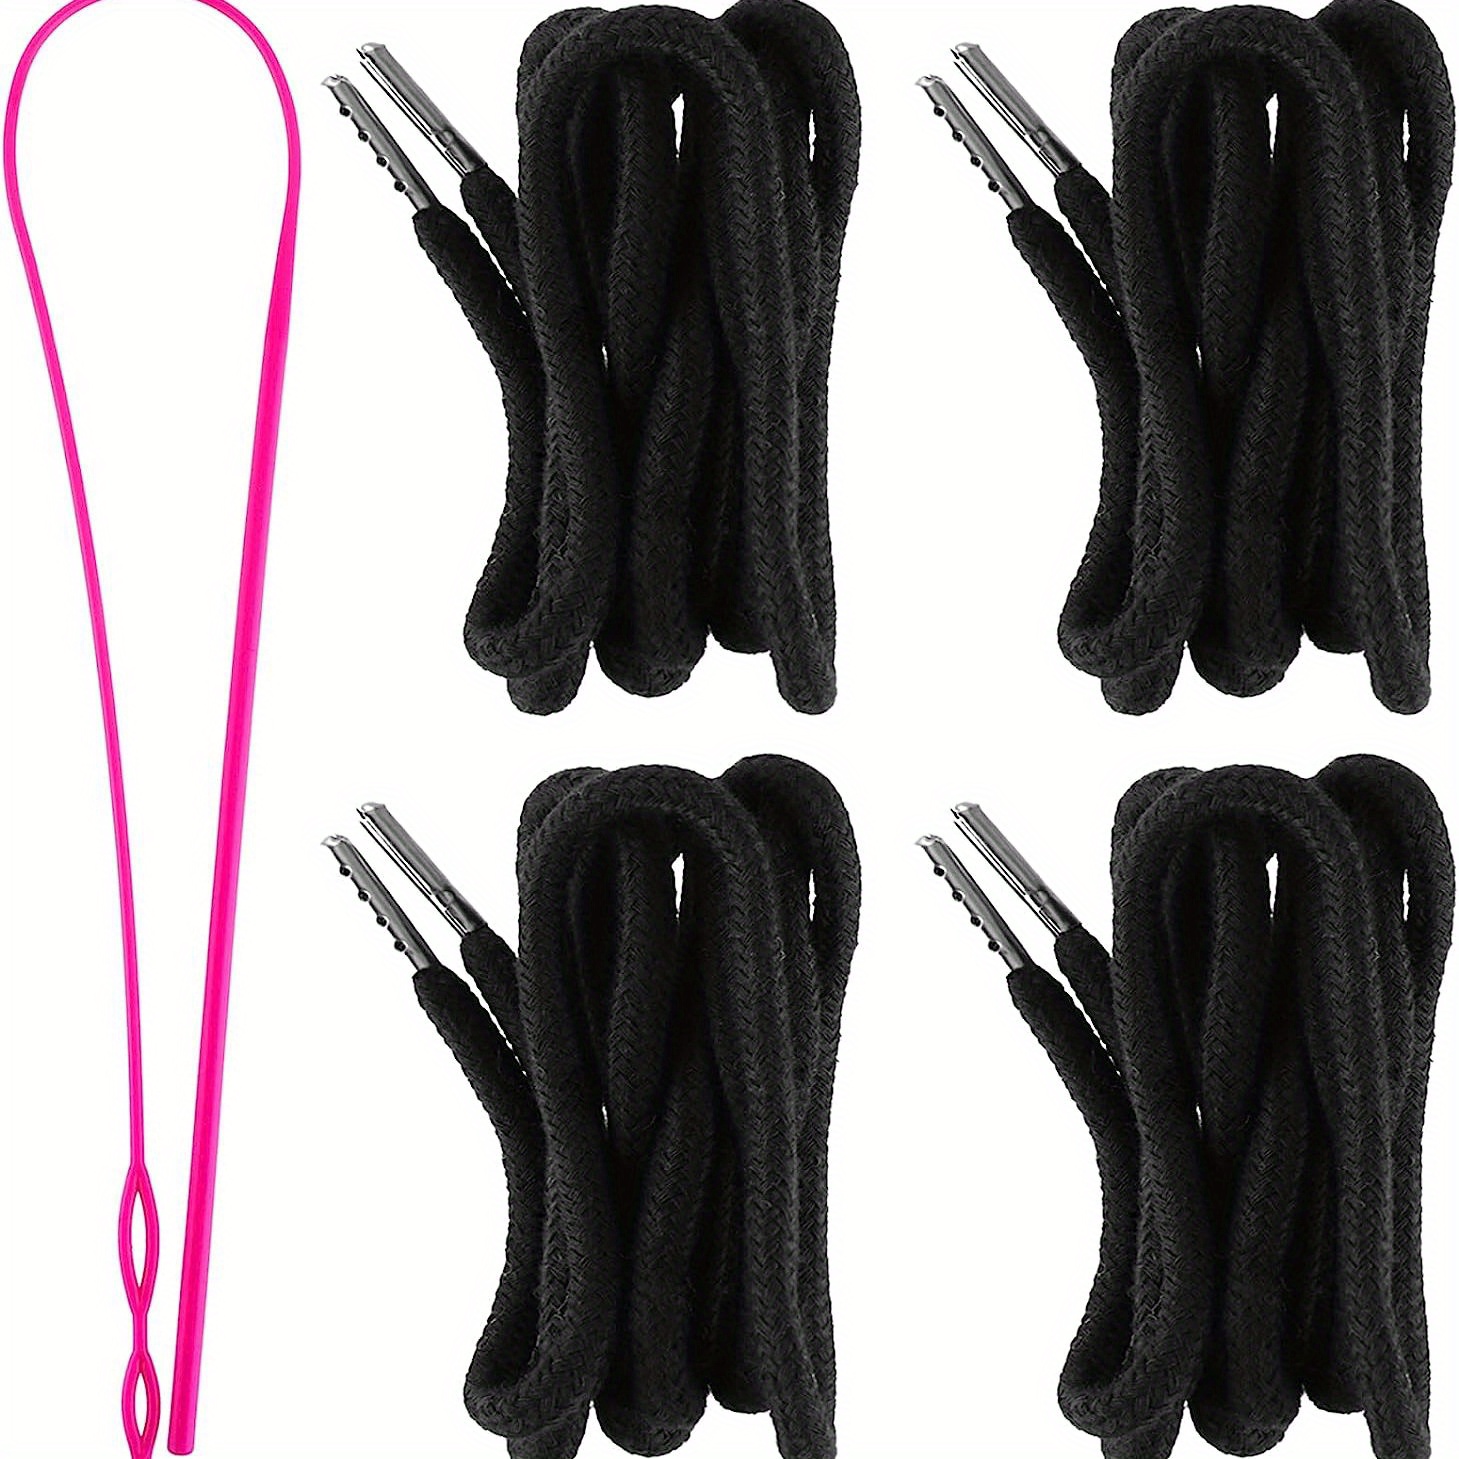  Replacement Drawstring for Shorts - 10Pcs Durable Hoodie String  Replacement in 5 Colors, 52Inches Drawstring Replacement with 3 Drawstring  Threader Tool for Pants Sweatshirt Hoodie : Arts, Crafts & Sewing